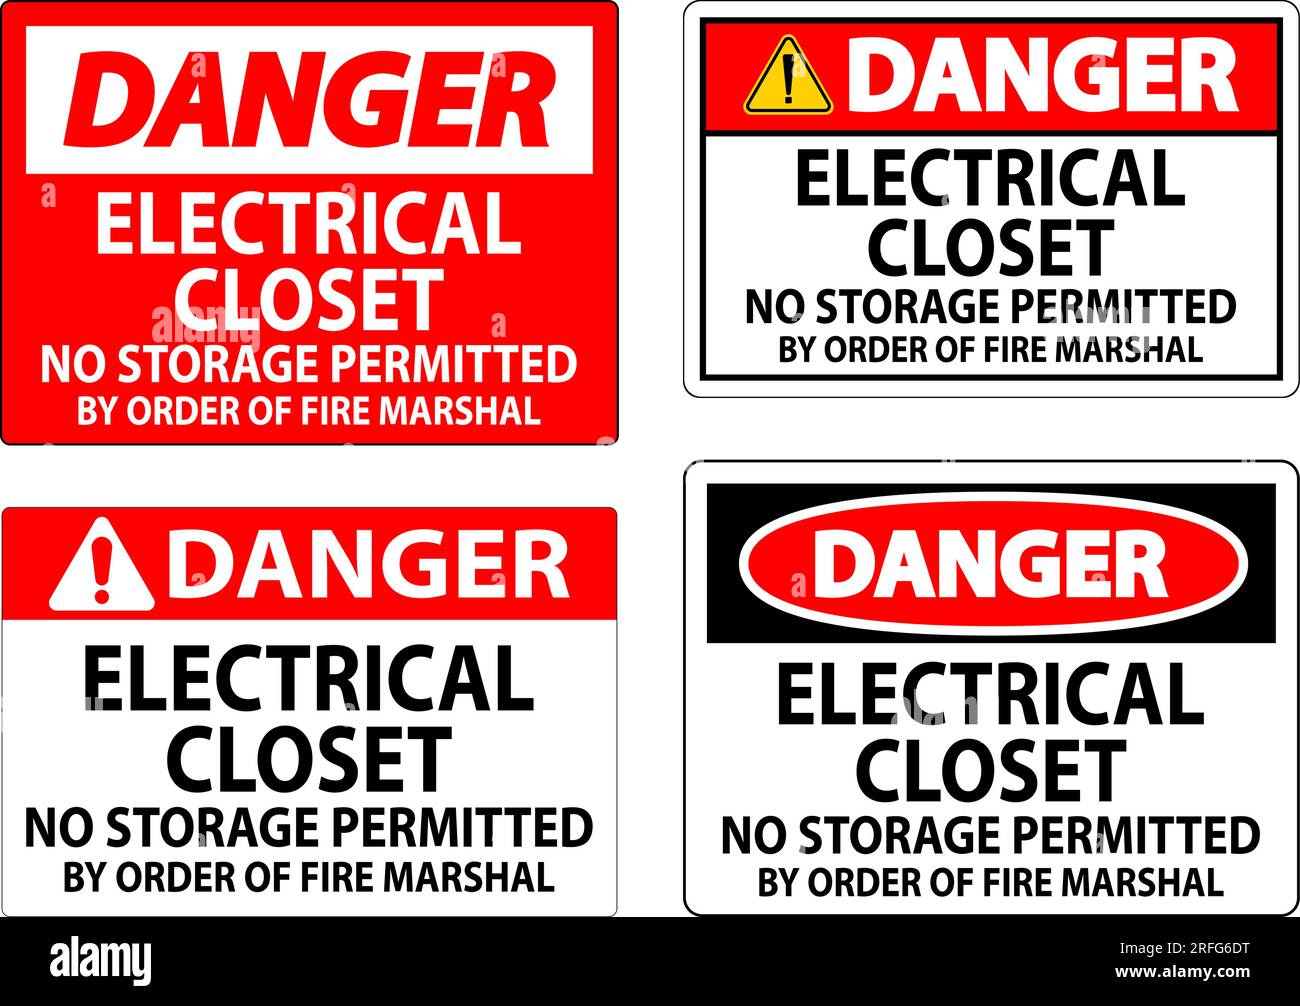 Danger Sign Electrical Closet - No Storage Permitted By Order Of Fire Marshal Stock Vector